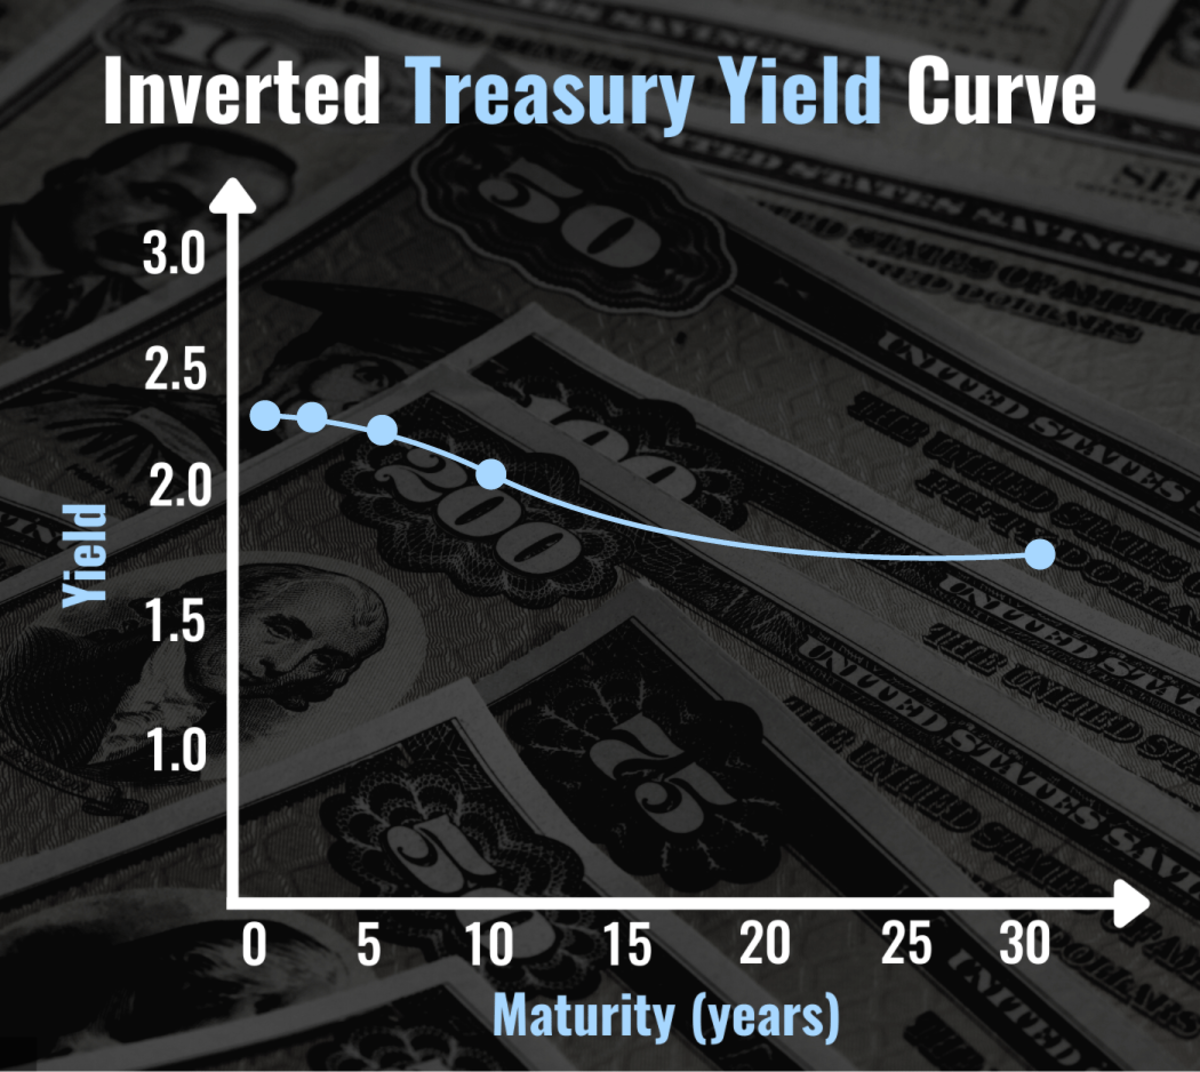 "Inverted" Treasury yields happen when short-term Treasuries offer greater yields than long-term Treasuries.